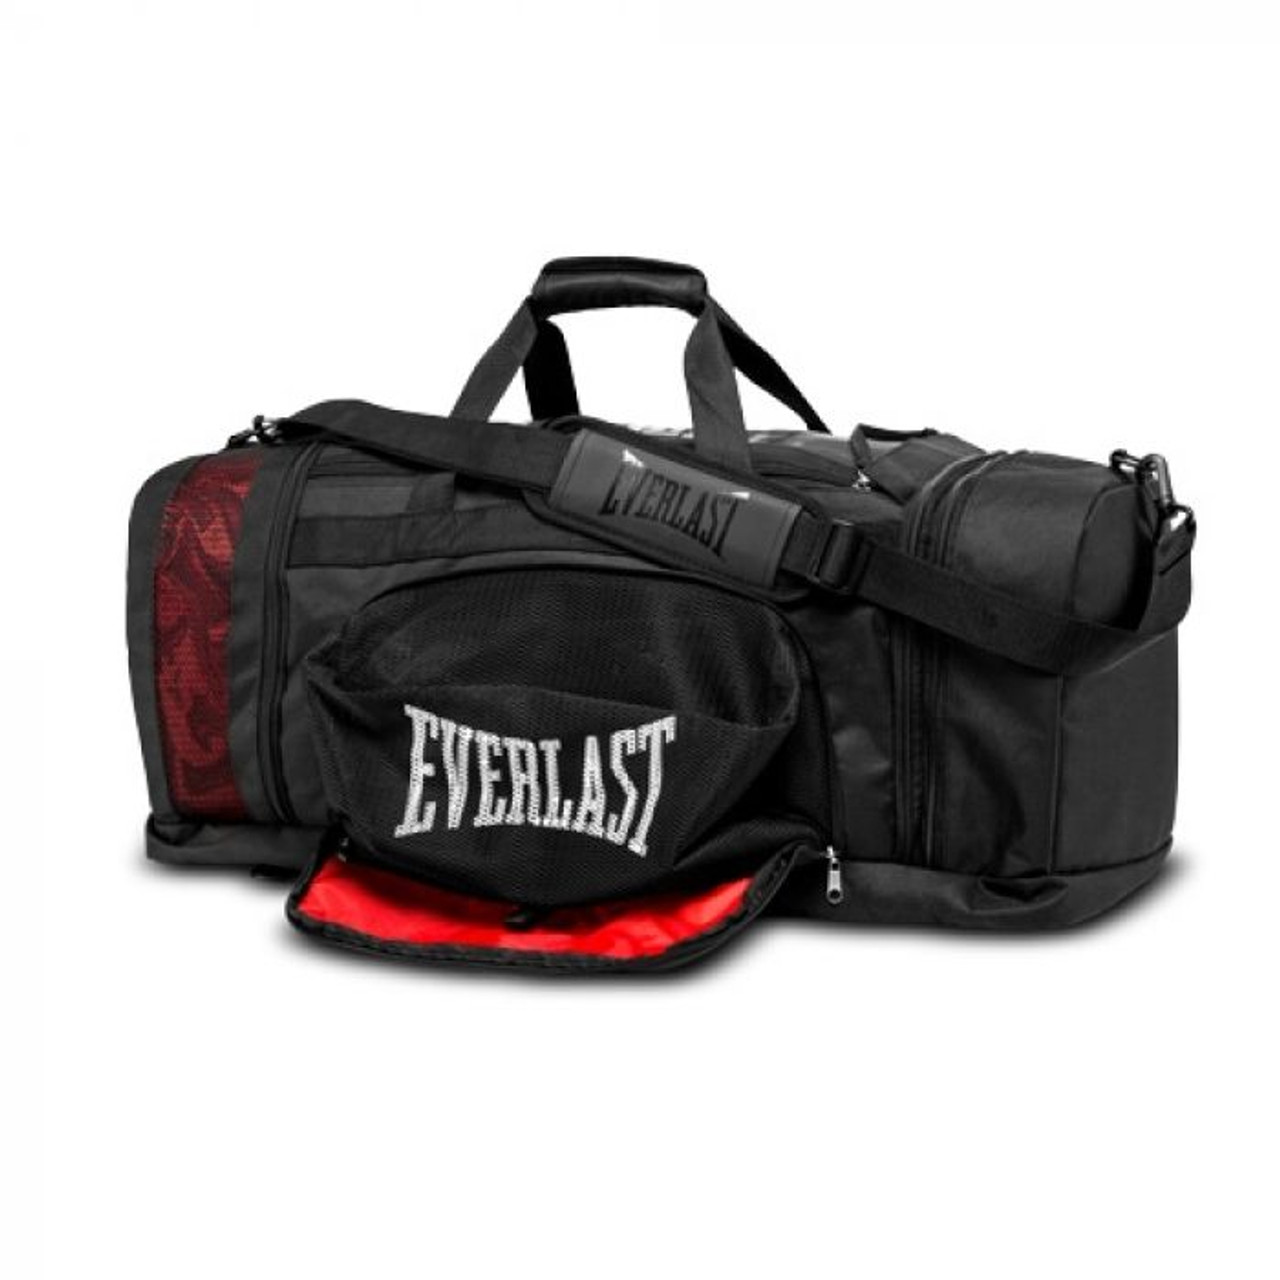 Gym Bag Essentials: From Basics to Sport-Specific Necessities